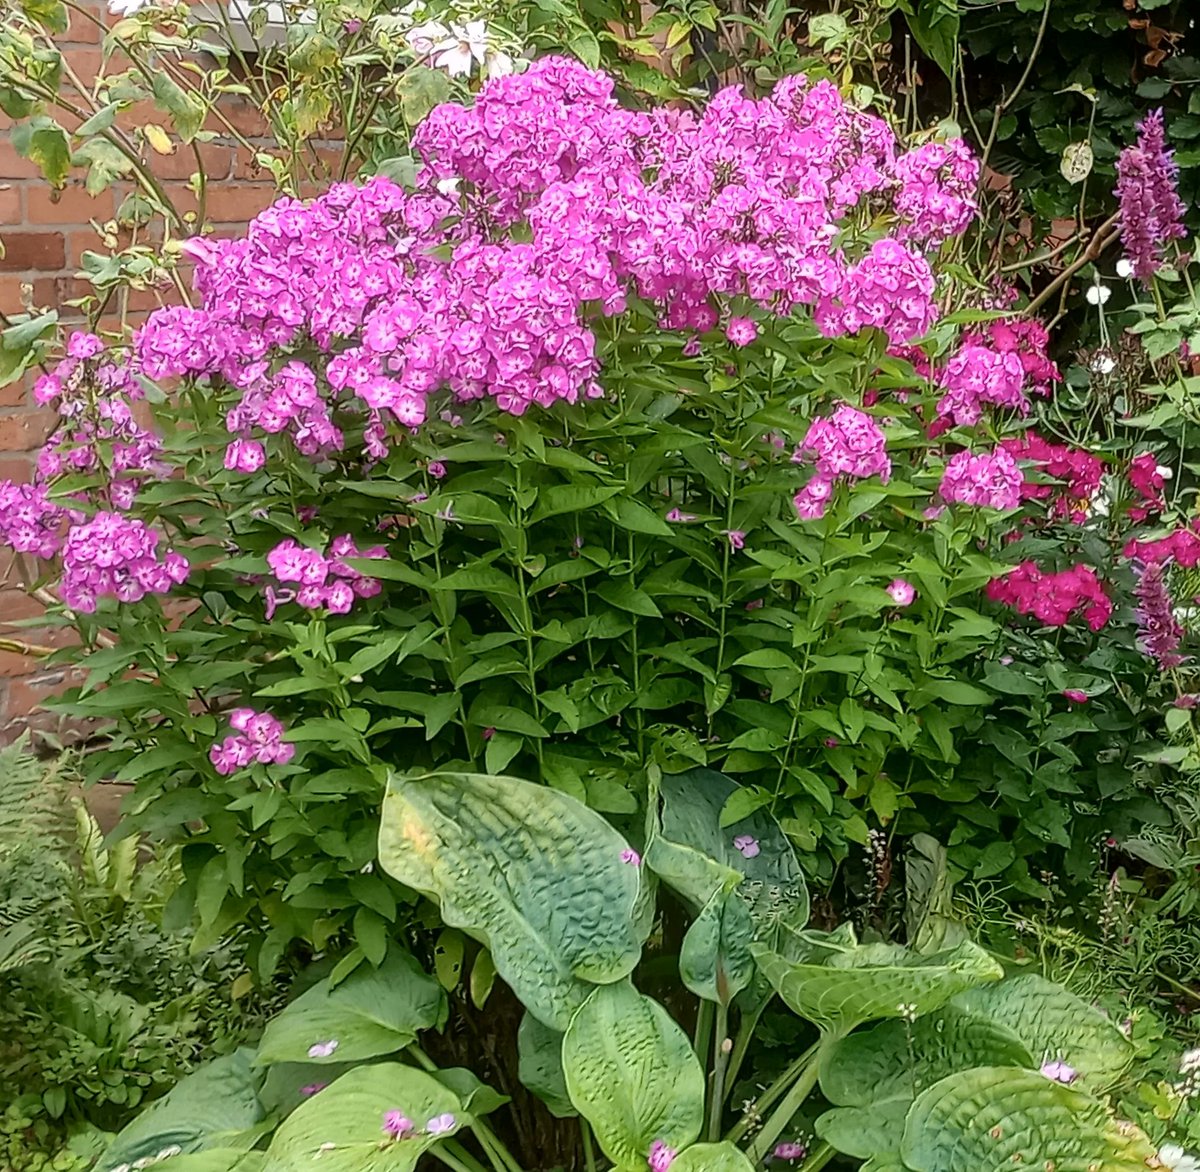 There's nothing like a great big clump of phlox to liven up the late summer border #gardening #mygarden #gardener